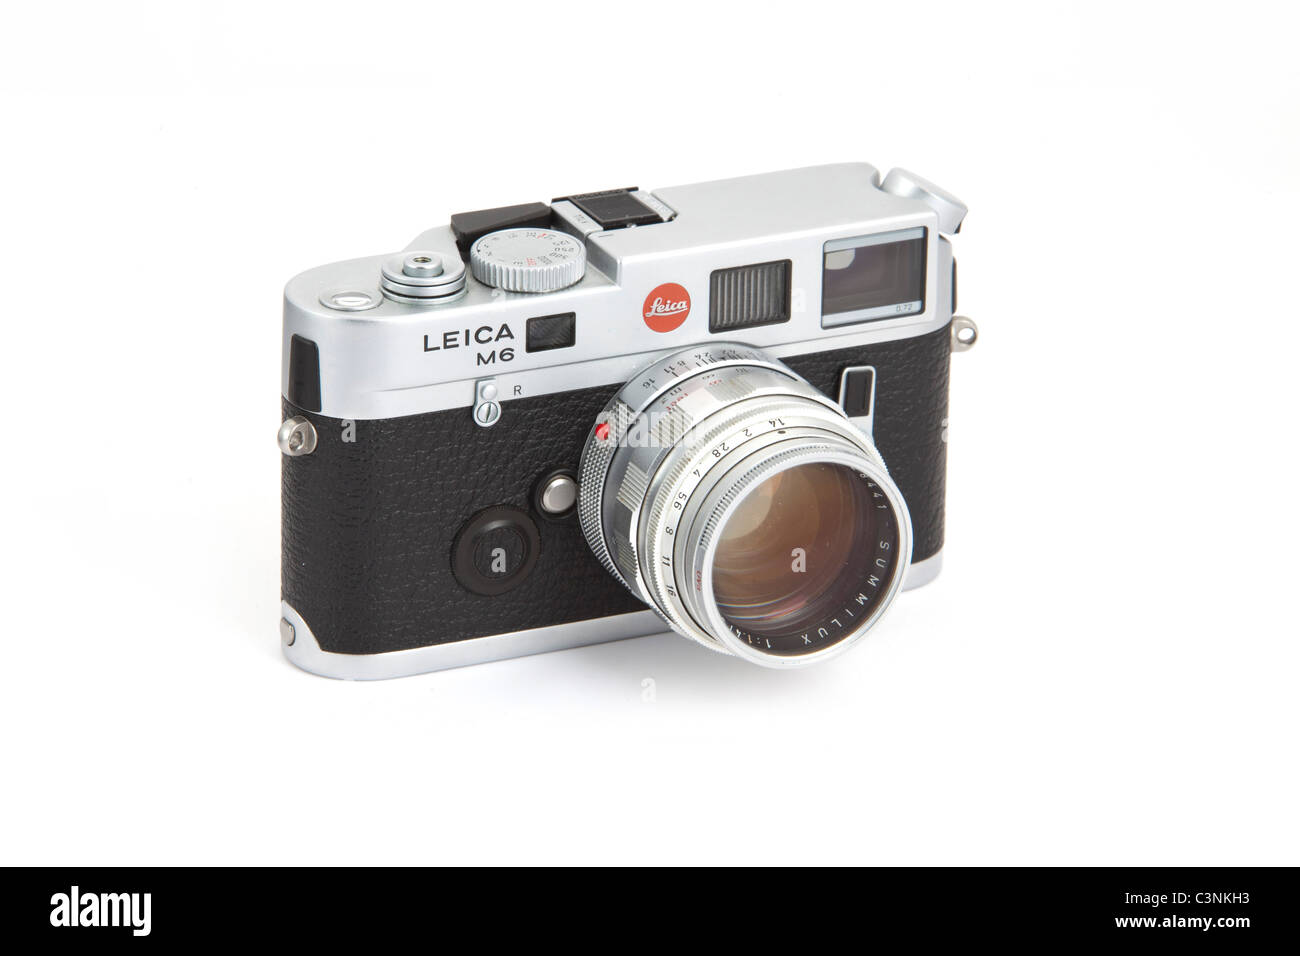 Leica M6 TTL camera body in silver on white background with 50mm f 